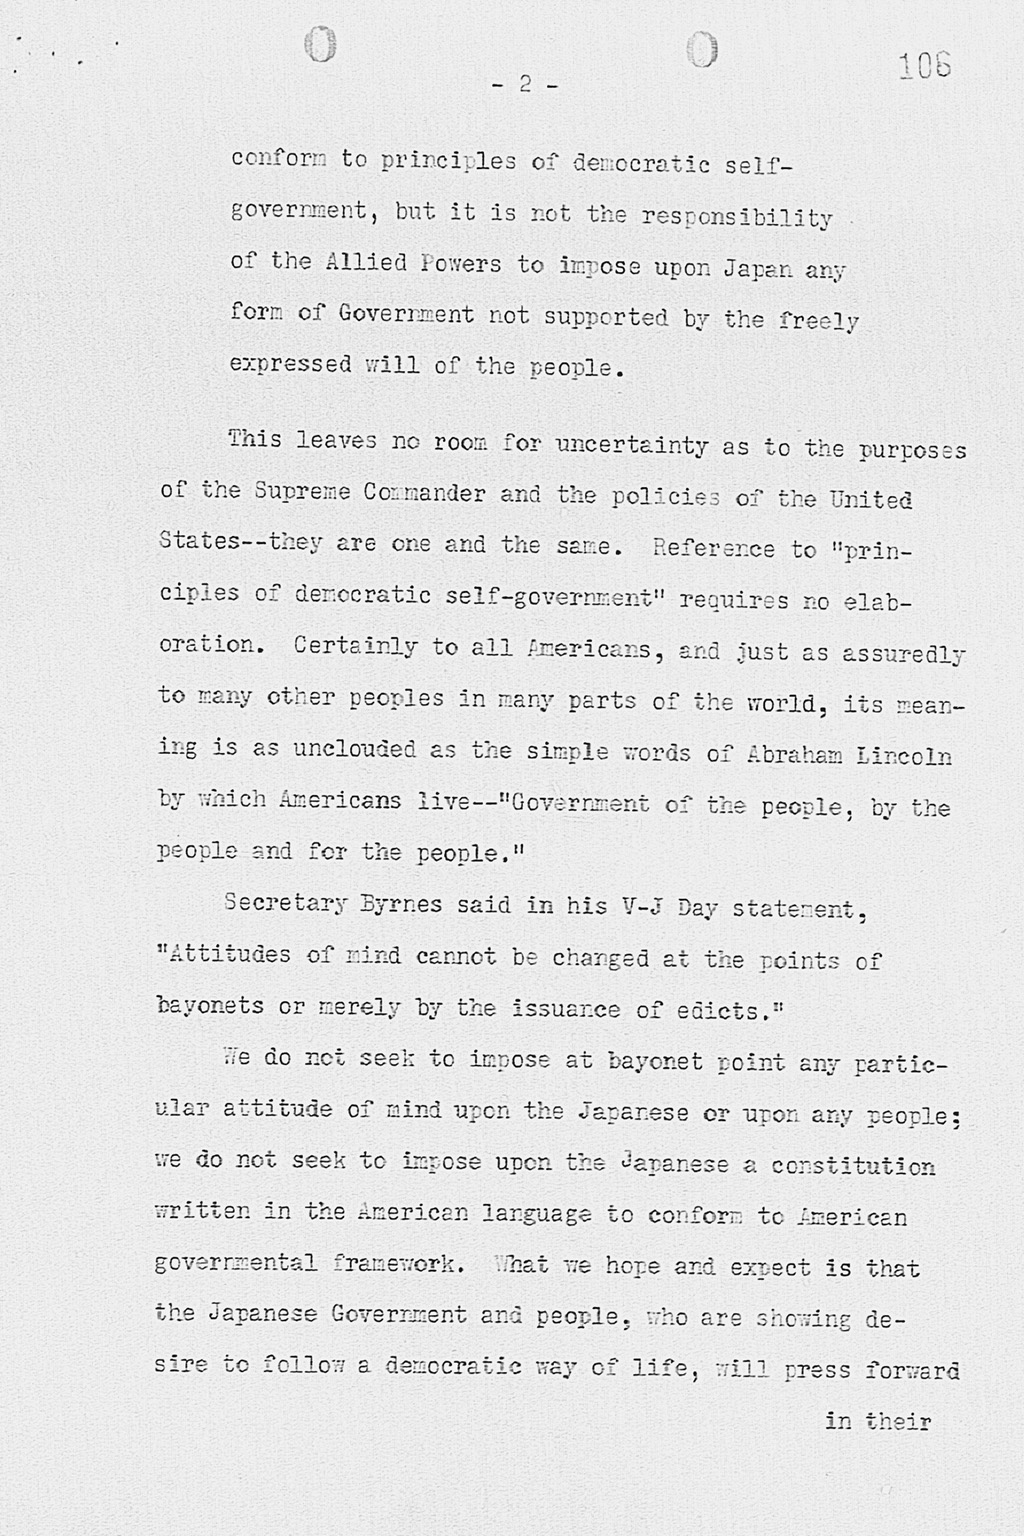 [Letter from George Atcheson, Jr. to Dean Acheson, Under Secretary of State dated November 7, 1945.](Larger image)